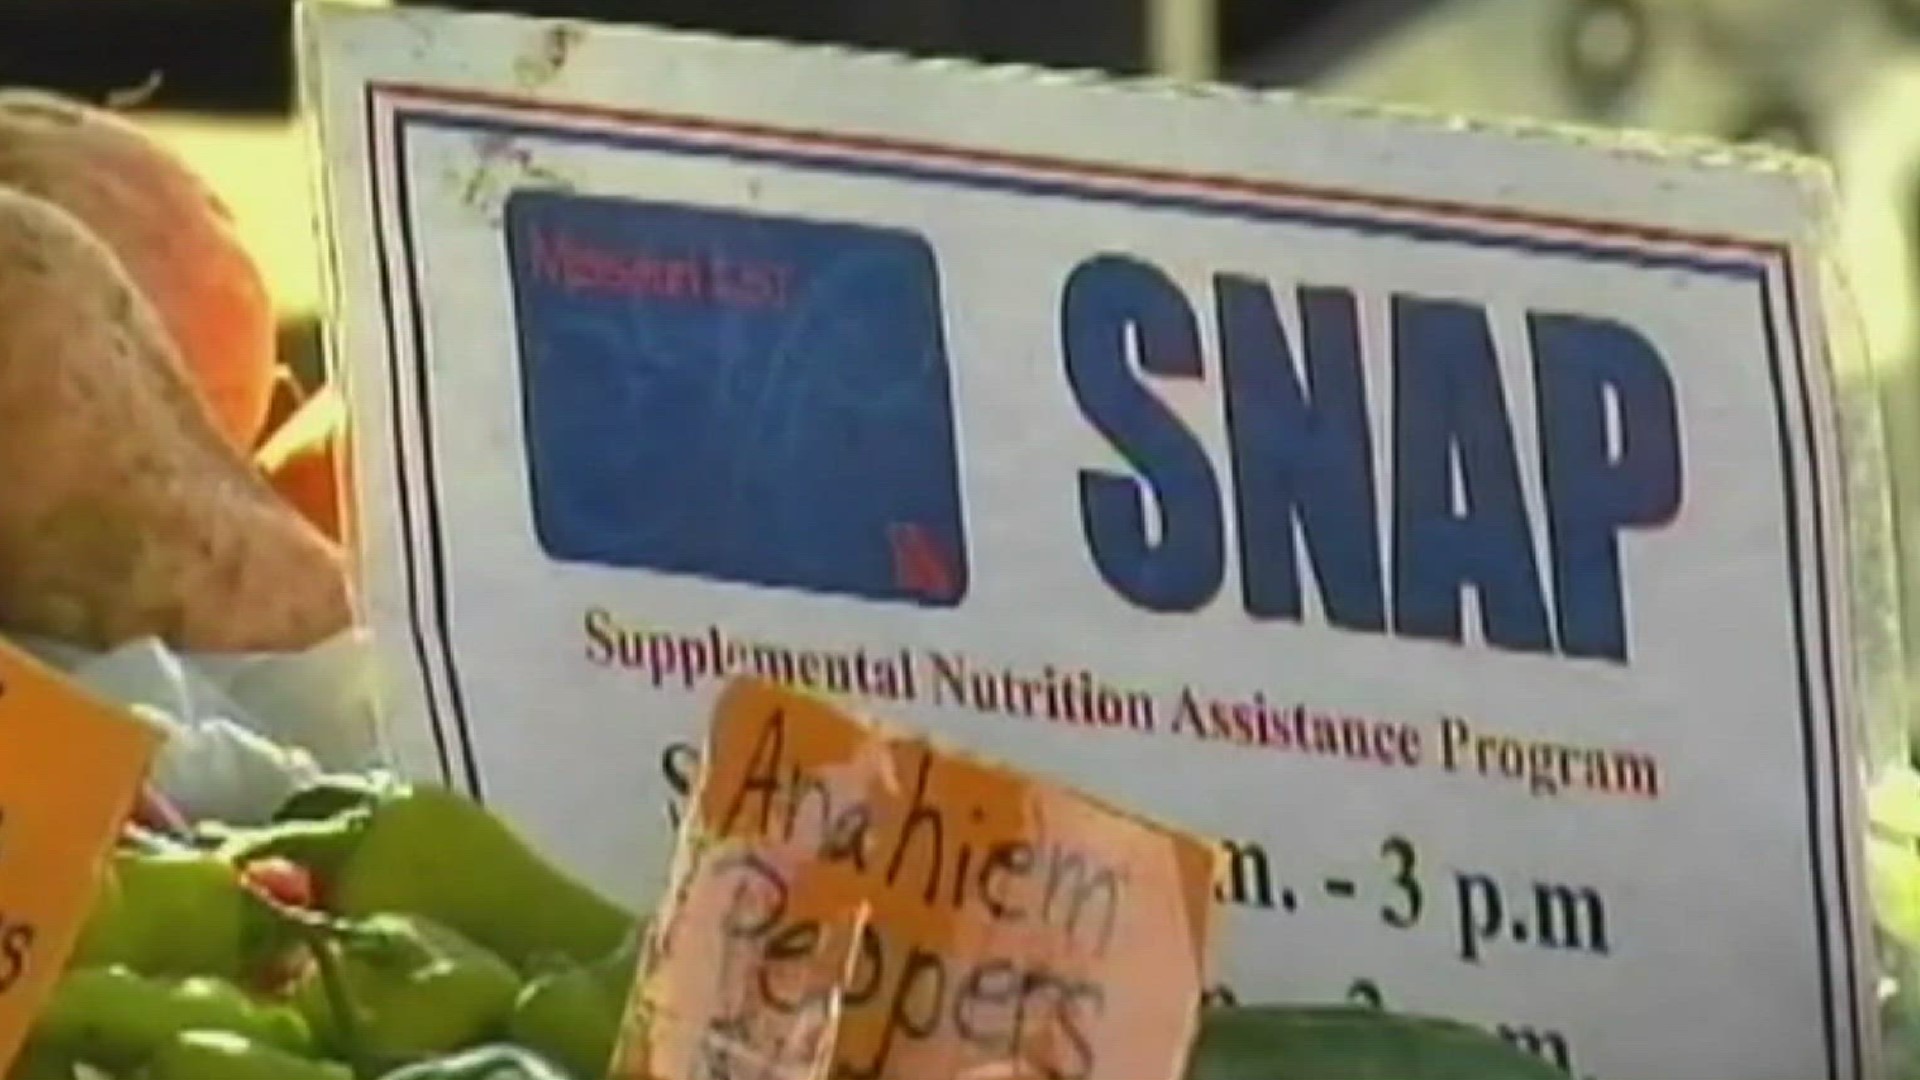 The SNAP program helps those with lower incomes purchase food. But now the money that was added to that program during the COVID-19 pandemic, is going away.